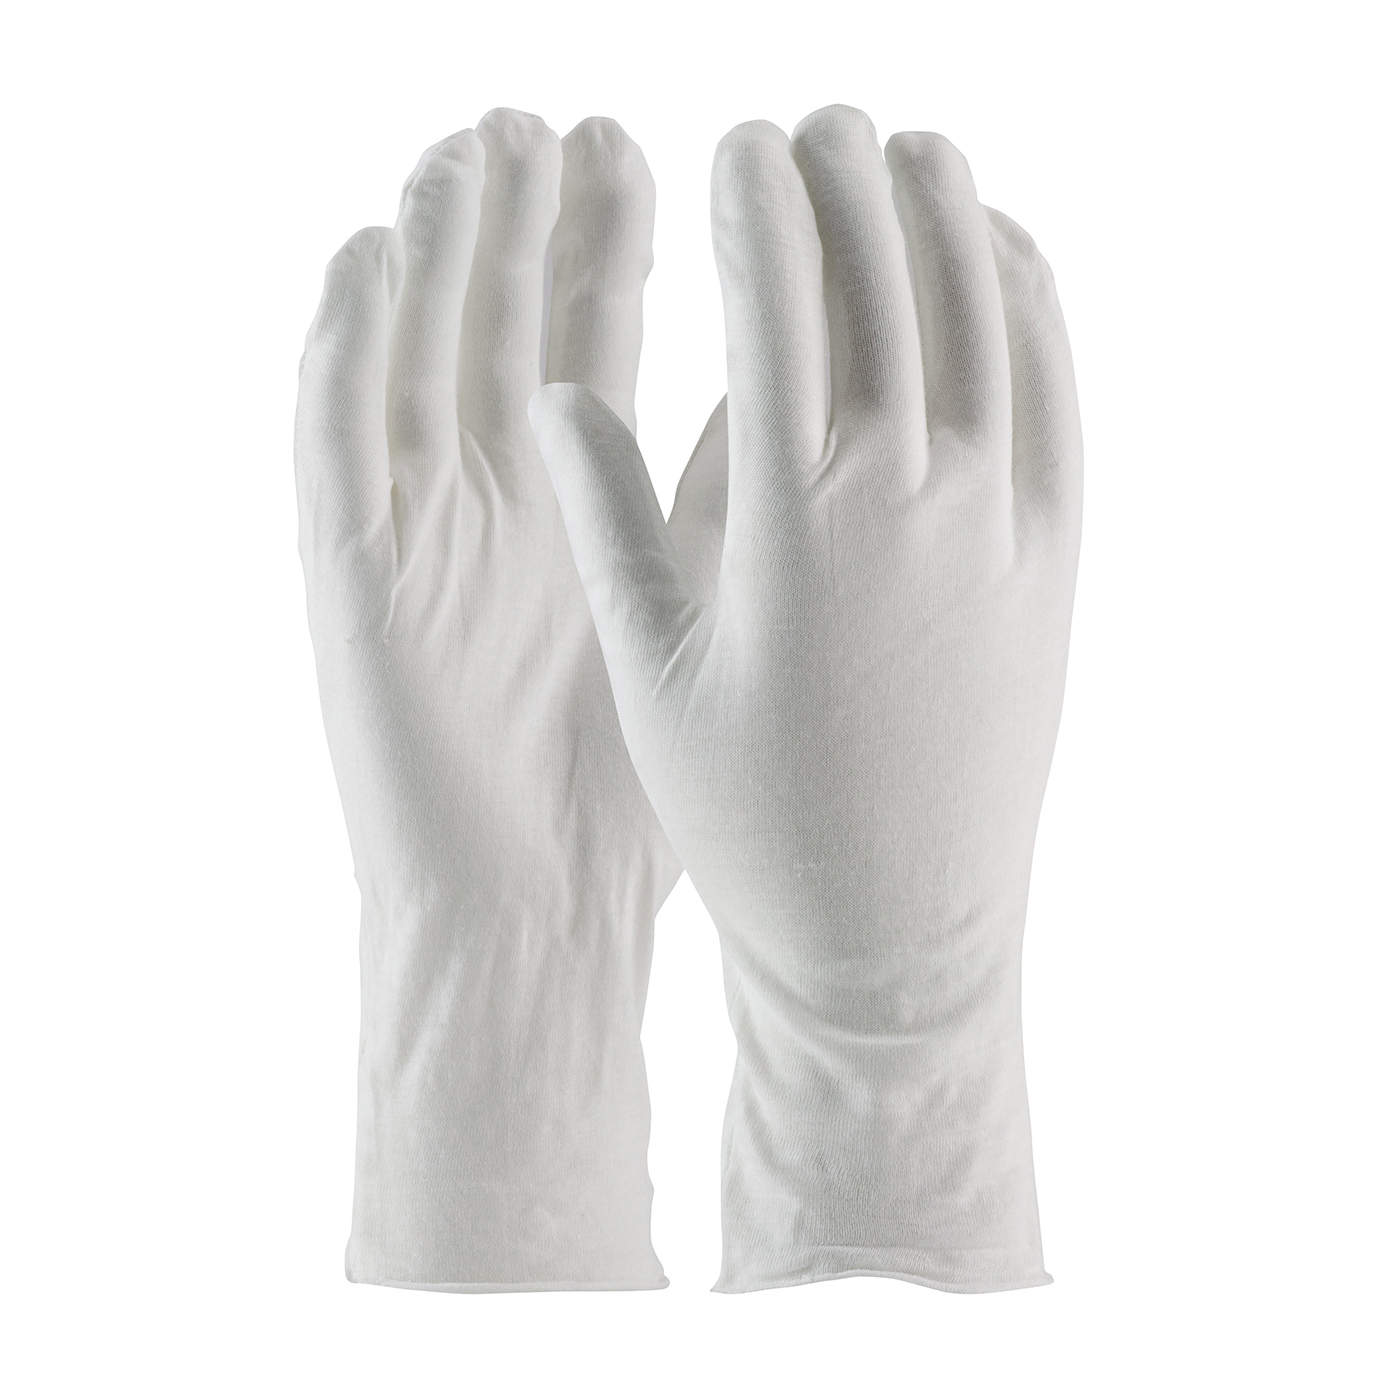 PIP® CleanTeam® 97-520/12 Medium Weight Men's Premium Grade Reversible Inspection Gloves, Universal, Cotton, White, Seamless Style, Paired Hand, 12 in L